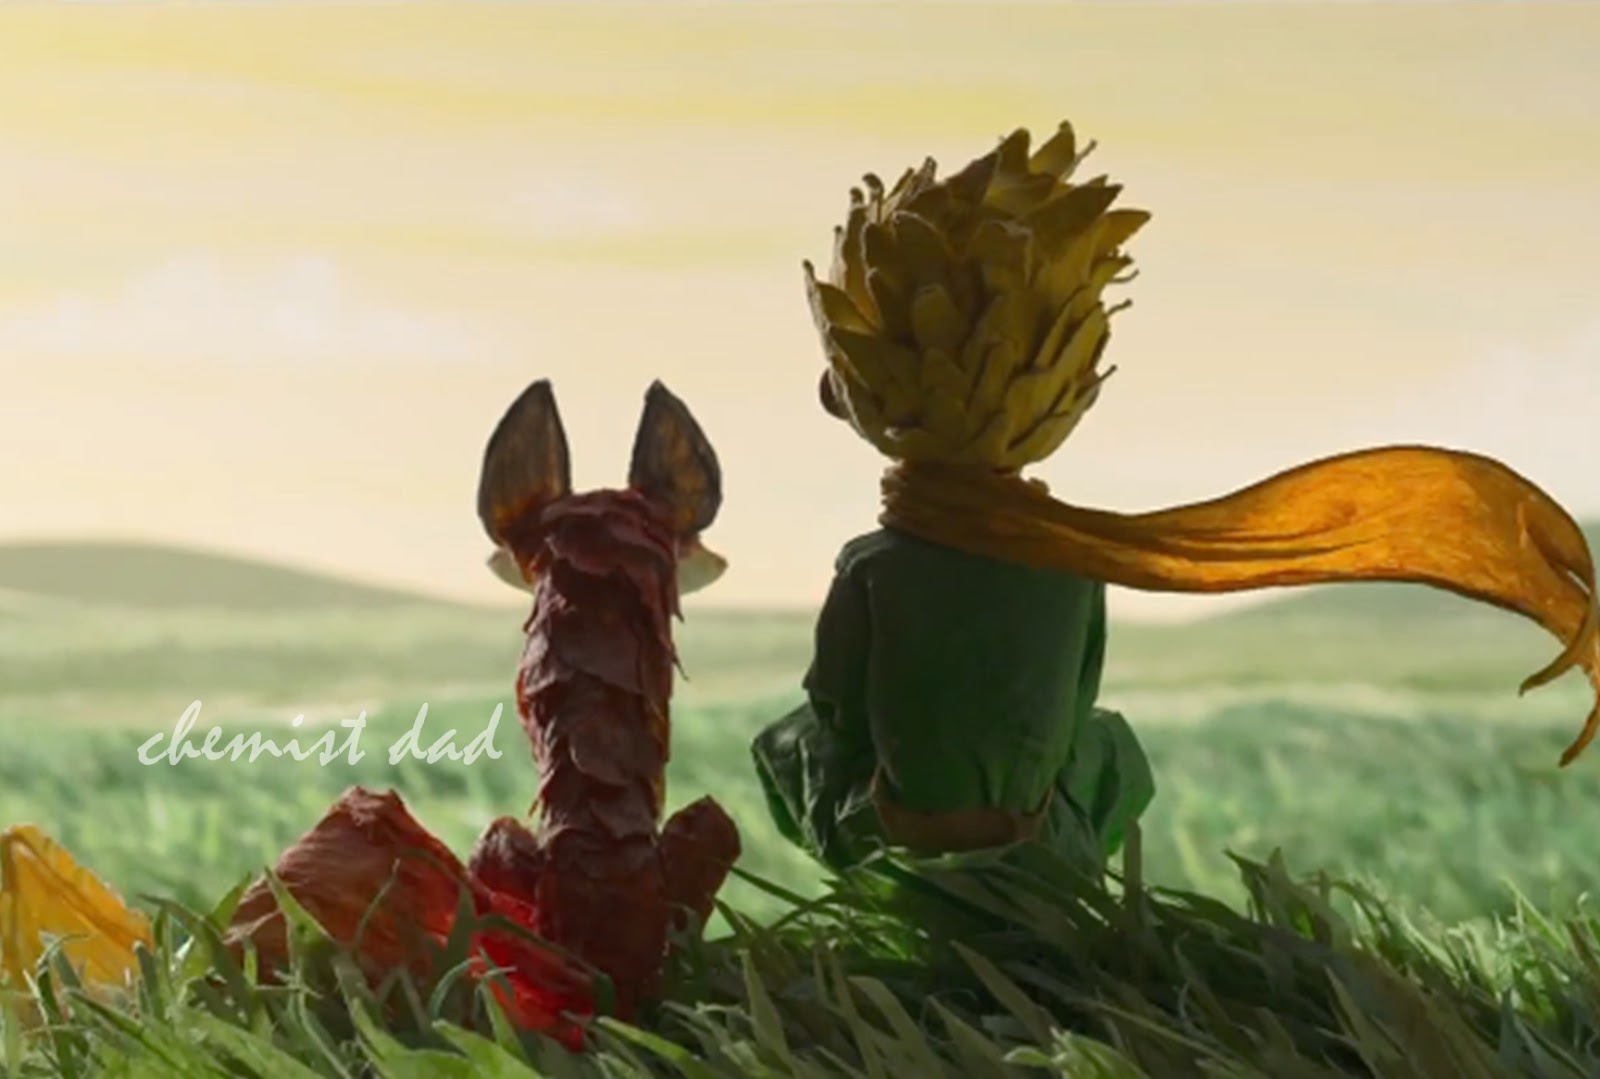 Movie Sharing: The Little Prince